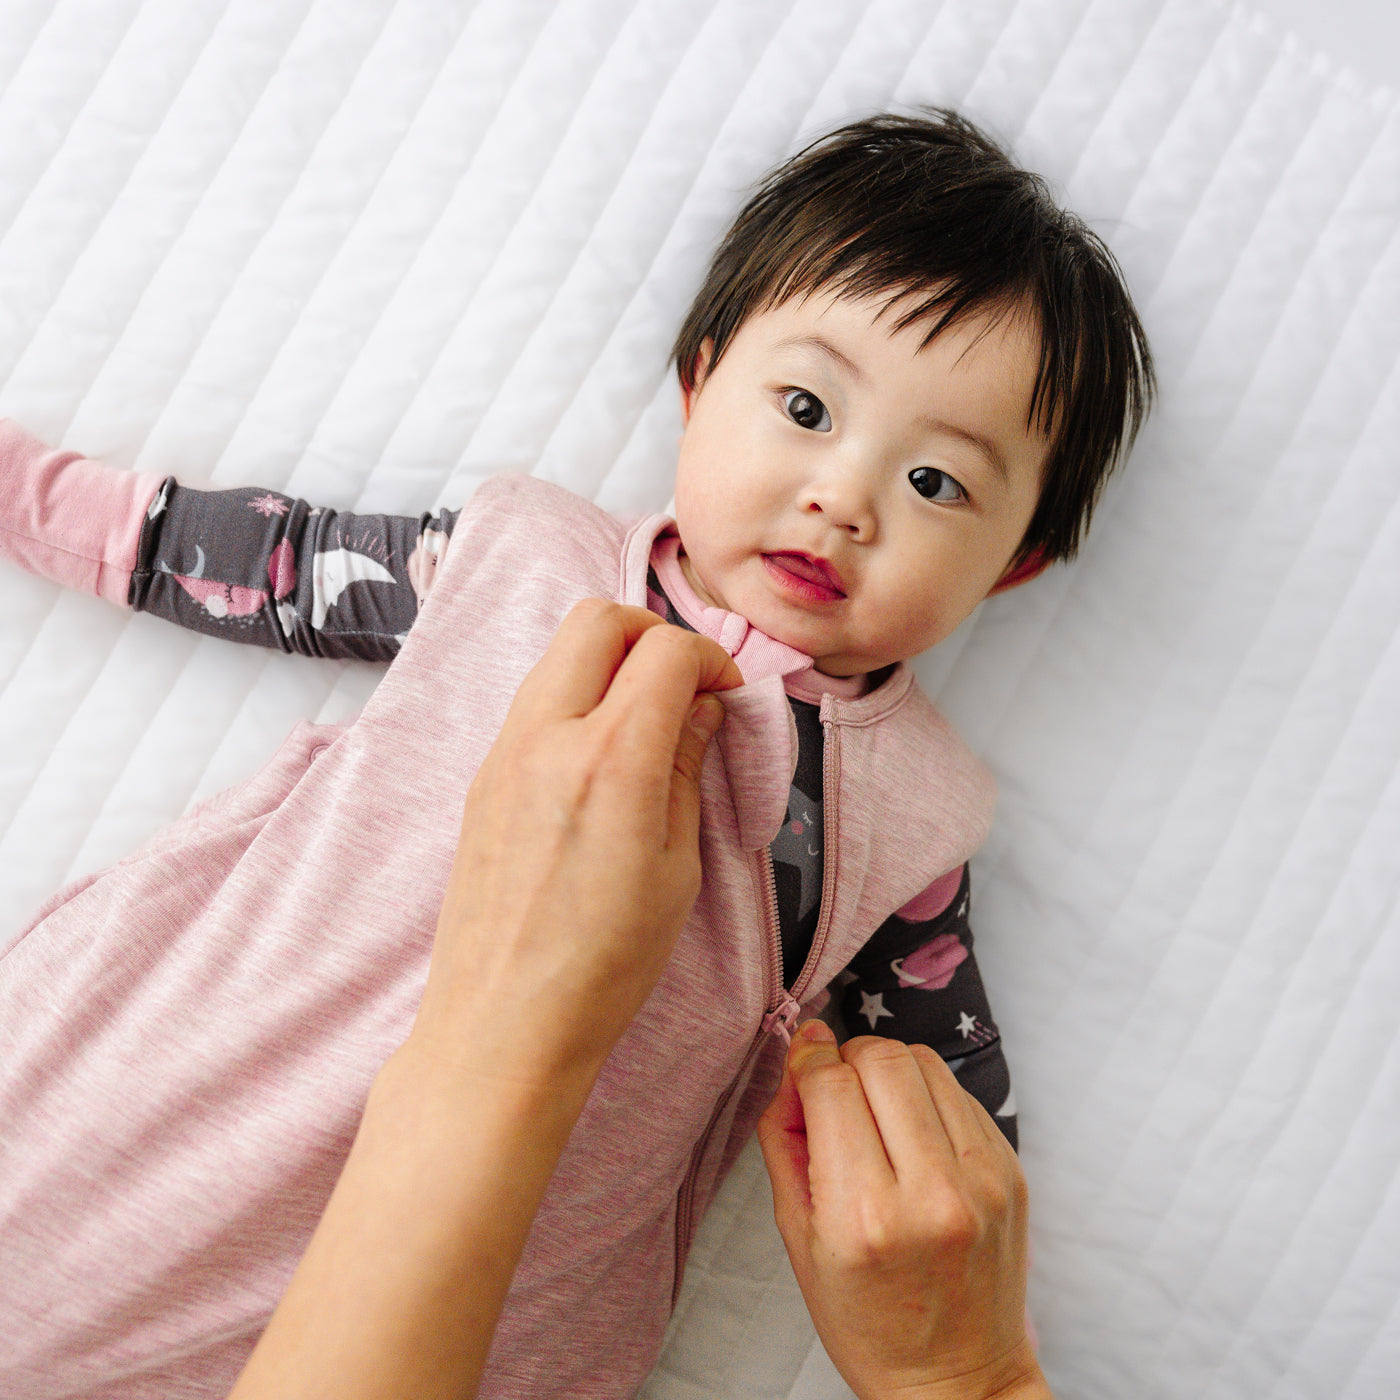 Child laying on a blanket while a parent zips up the Heather Mauve sleepy bag they are wearing